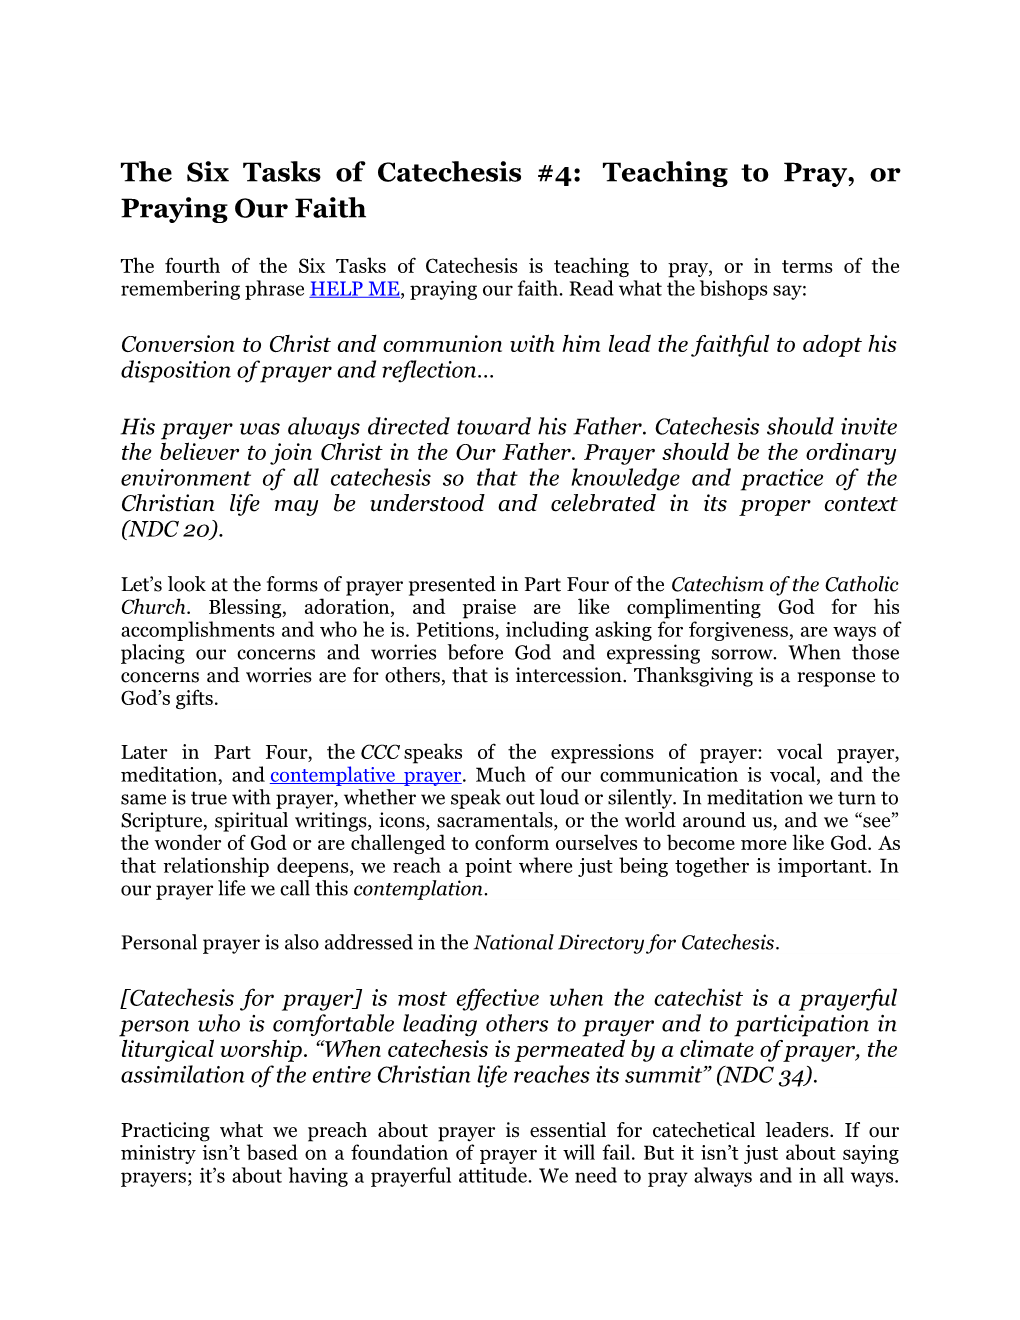 The Six Tasks of Catechesis #4:Teaching to Pray, Or Praying Our Faith